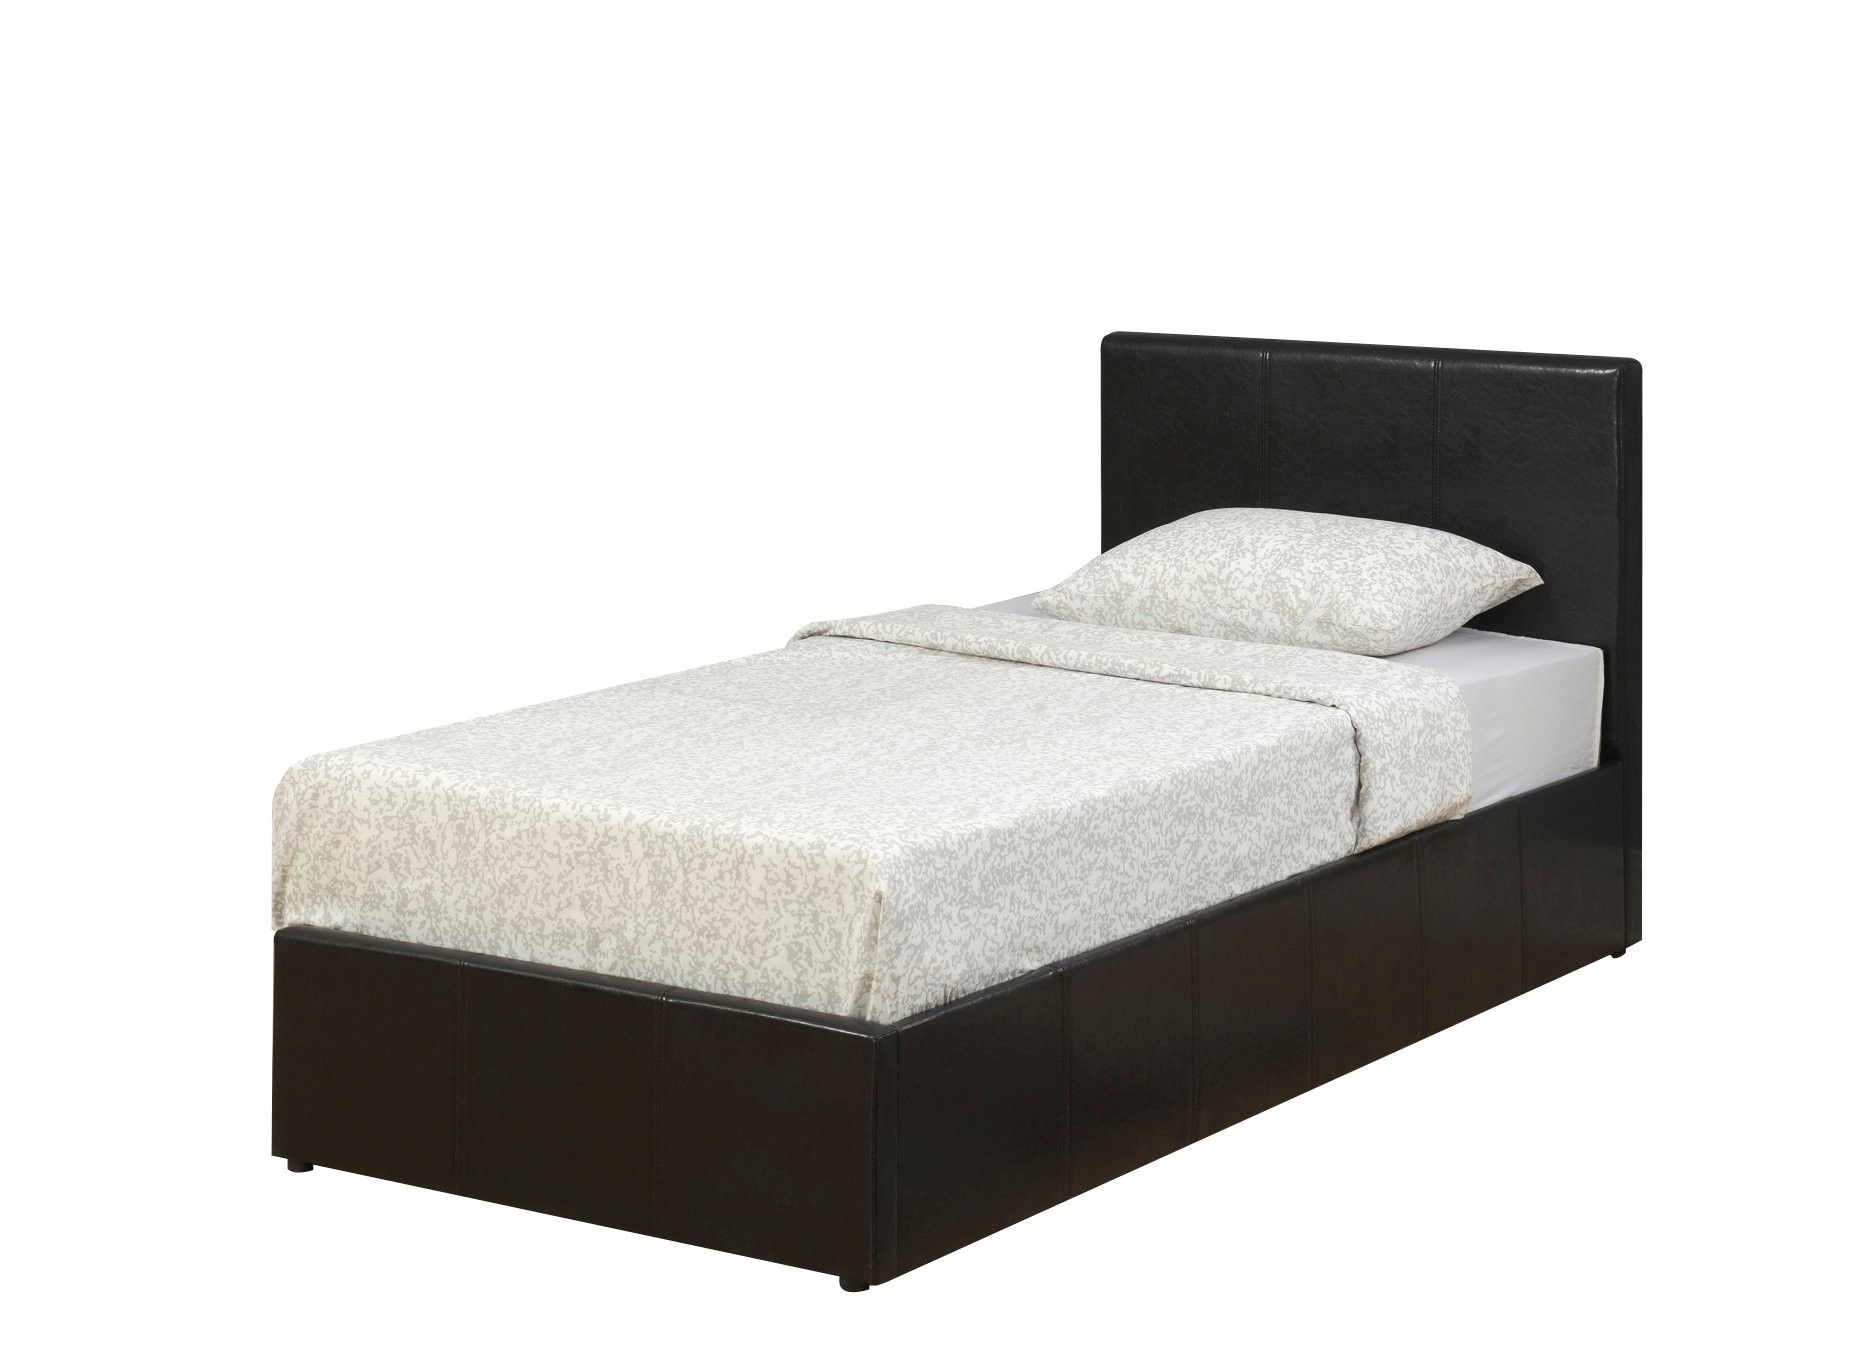 This Bonsoni Simple Style Single Berlin Ottoman Bed Frame Bed Frame Black 3ft is a beautiful piece of Bed demostrating the Bonsonis unparallel quality and